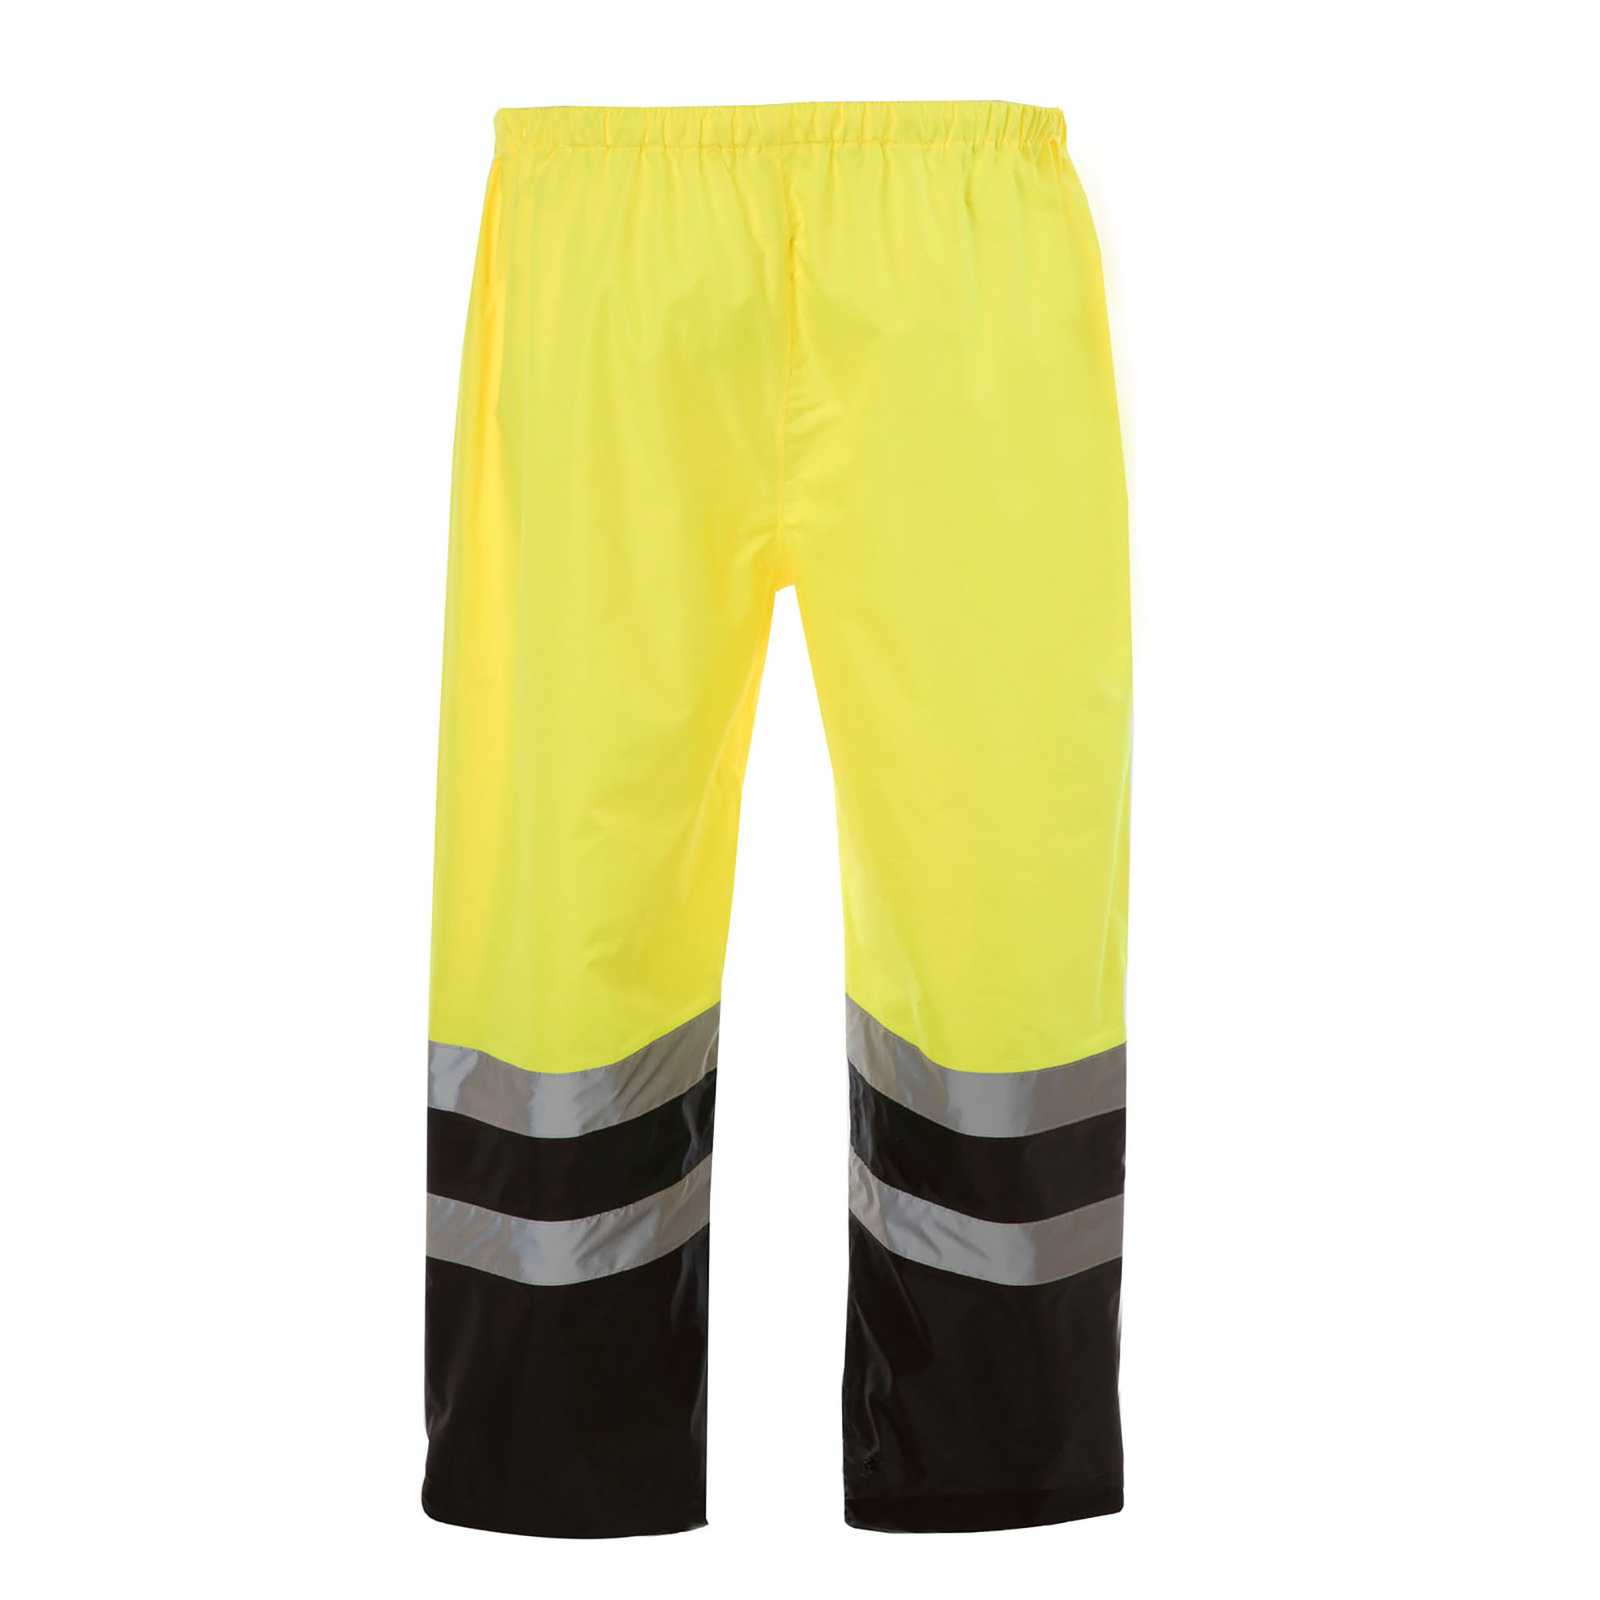 Back view of the black and yellow high visibility JORESTECH rain pant with reflective strips